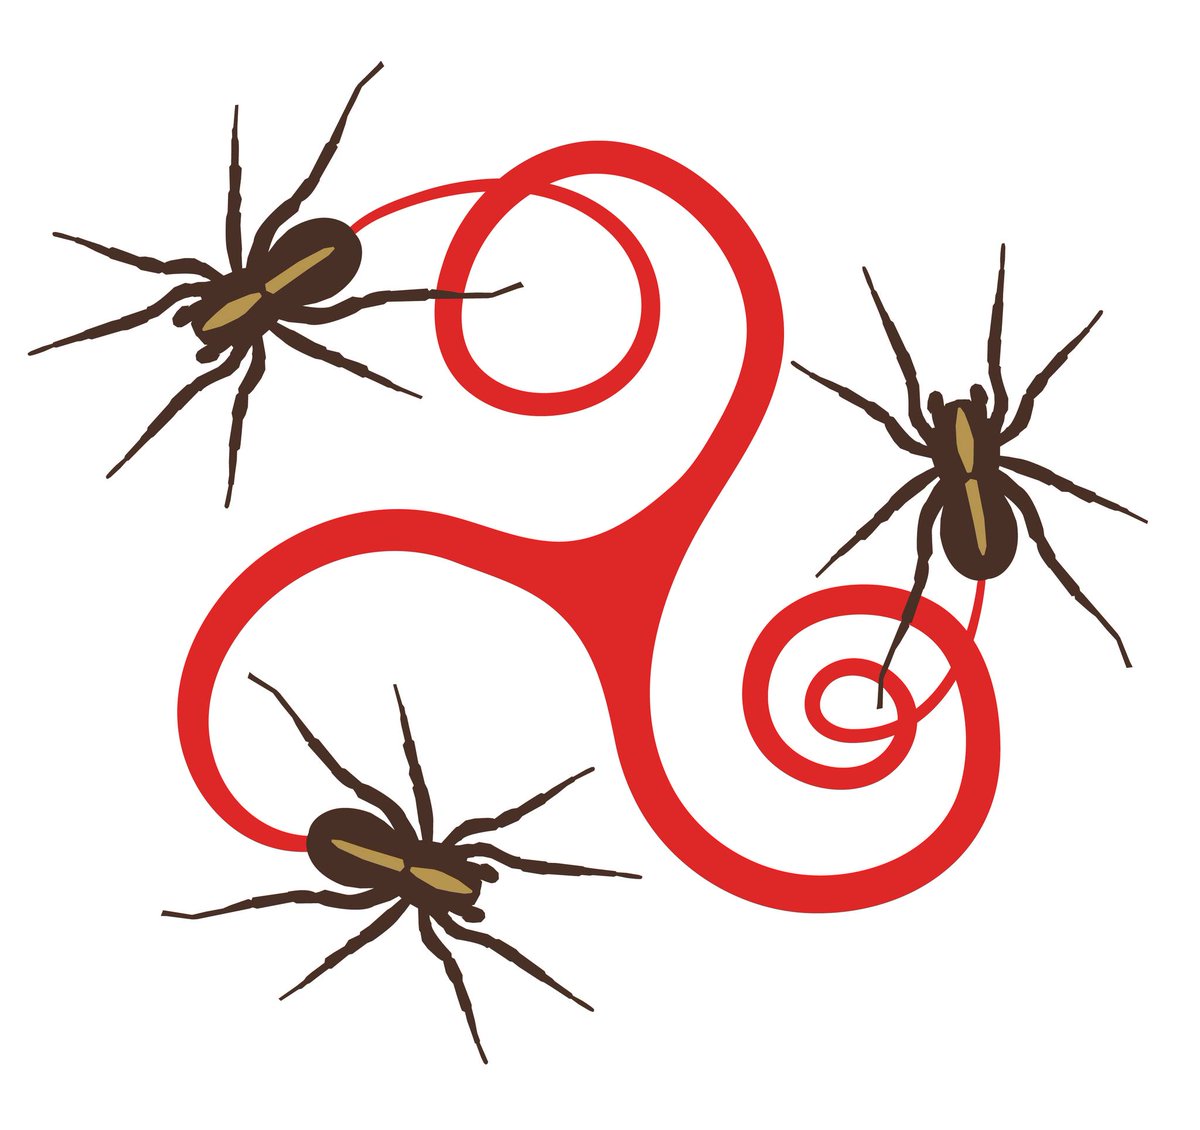 34th European congress of Arachnology will be held in Rennes next August, be sure to follow @34thECA2024 not to miss any info :) 🕷️🕸️ (did you see how cool is the logo? ⬇️)